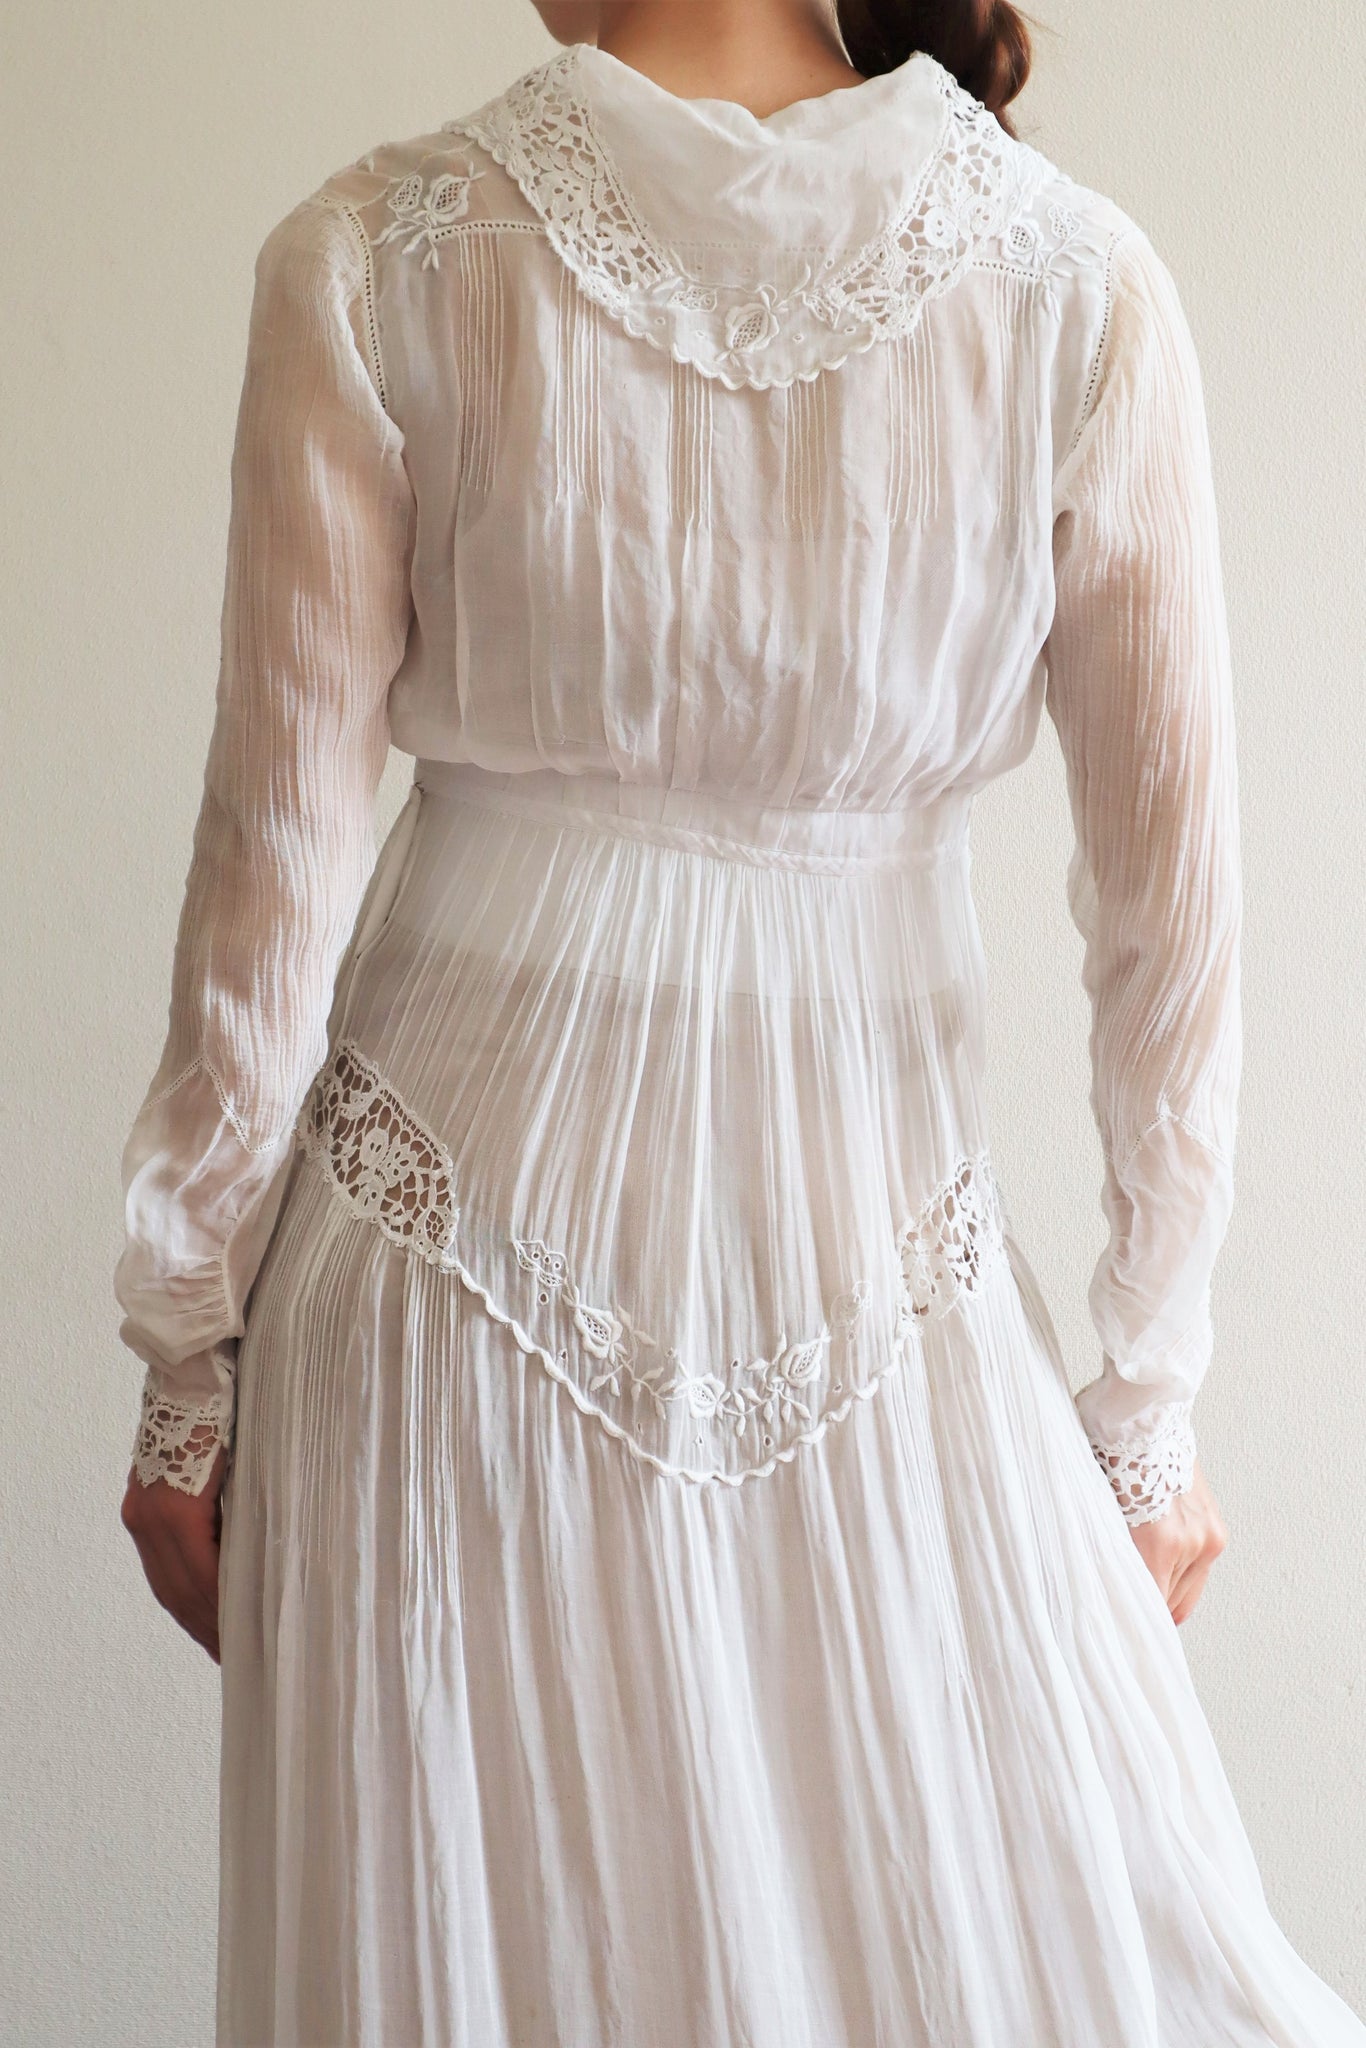 1900s Embroidered Hand Crochet Buttons Cotton Lawn Dress